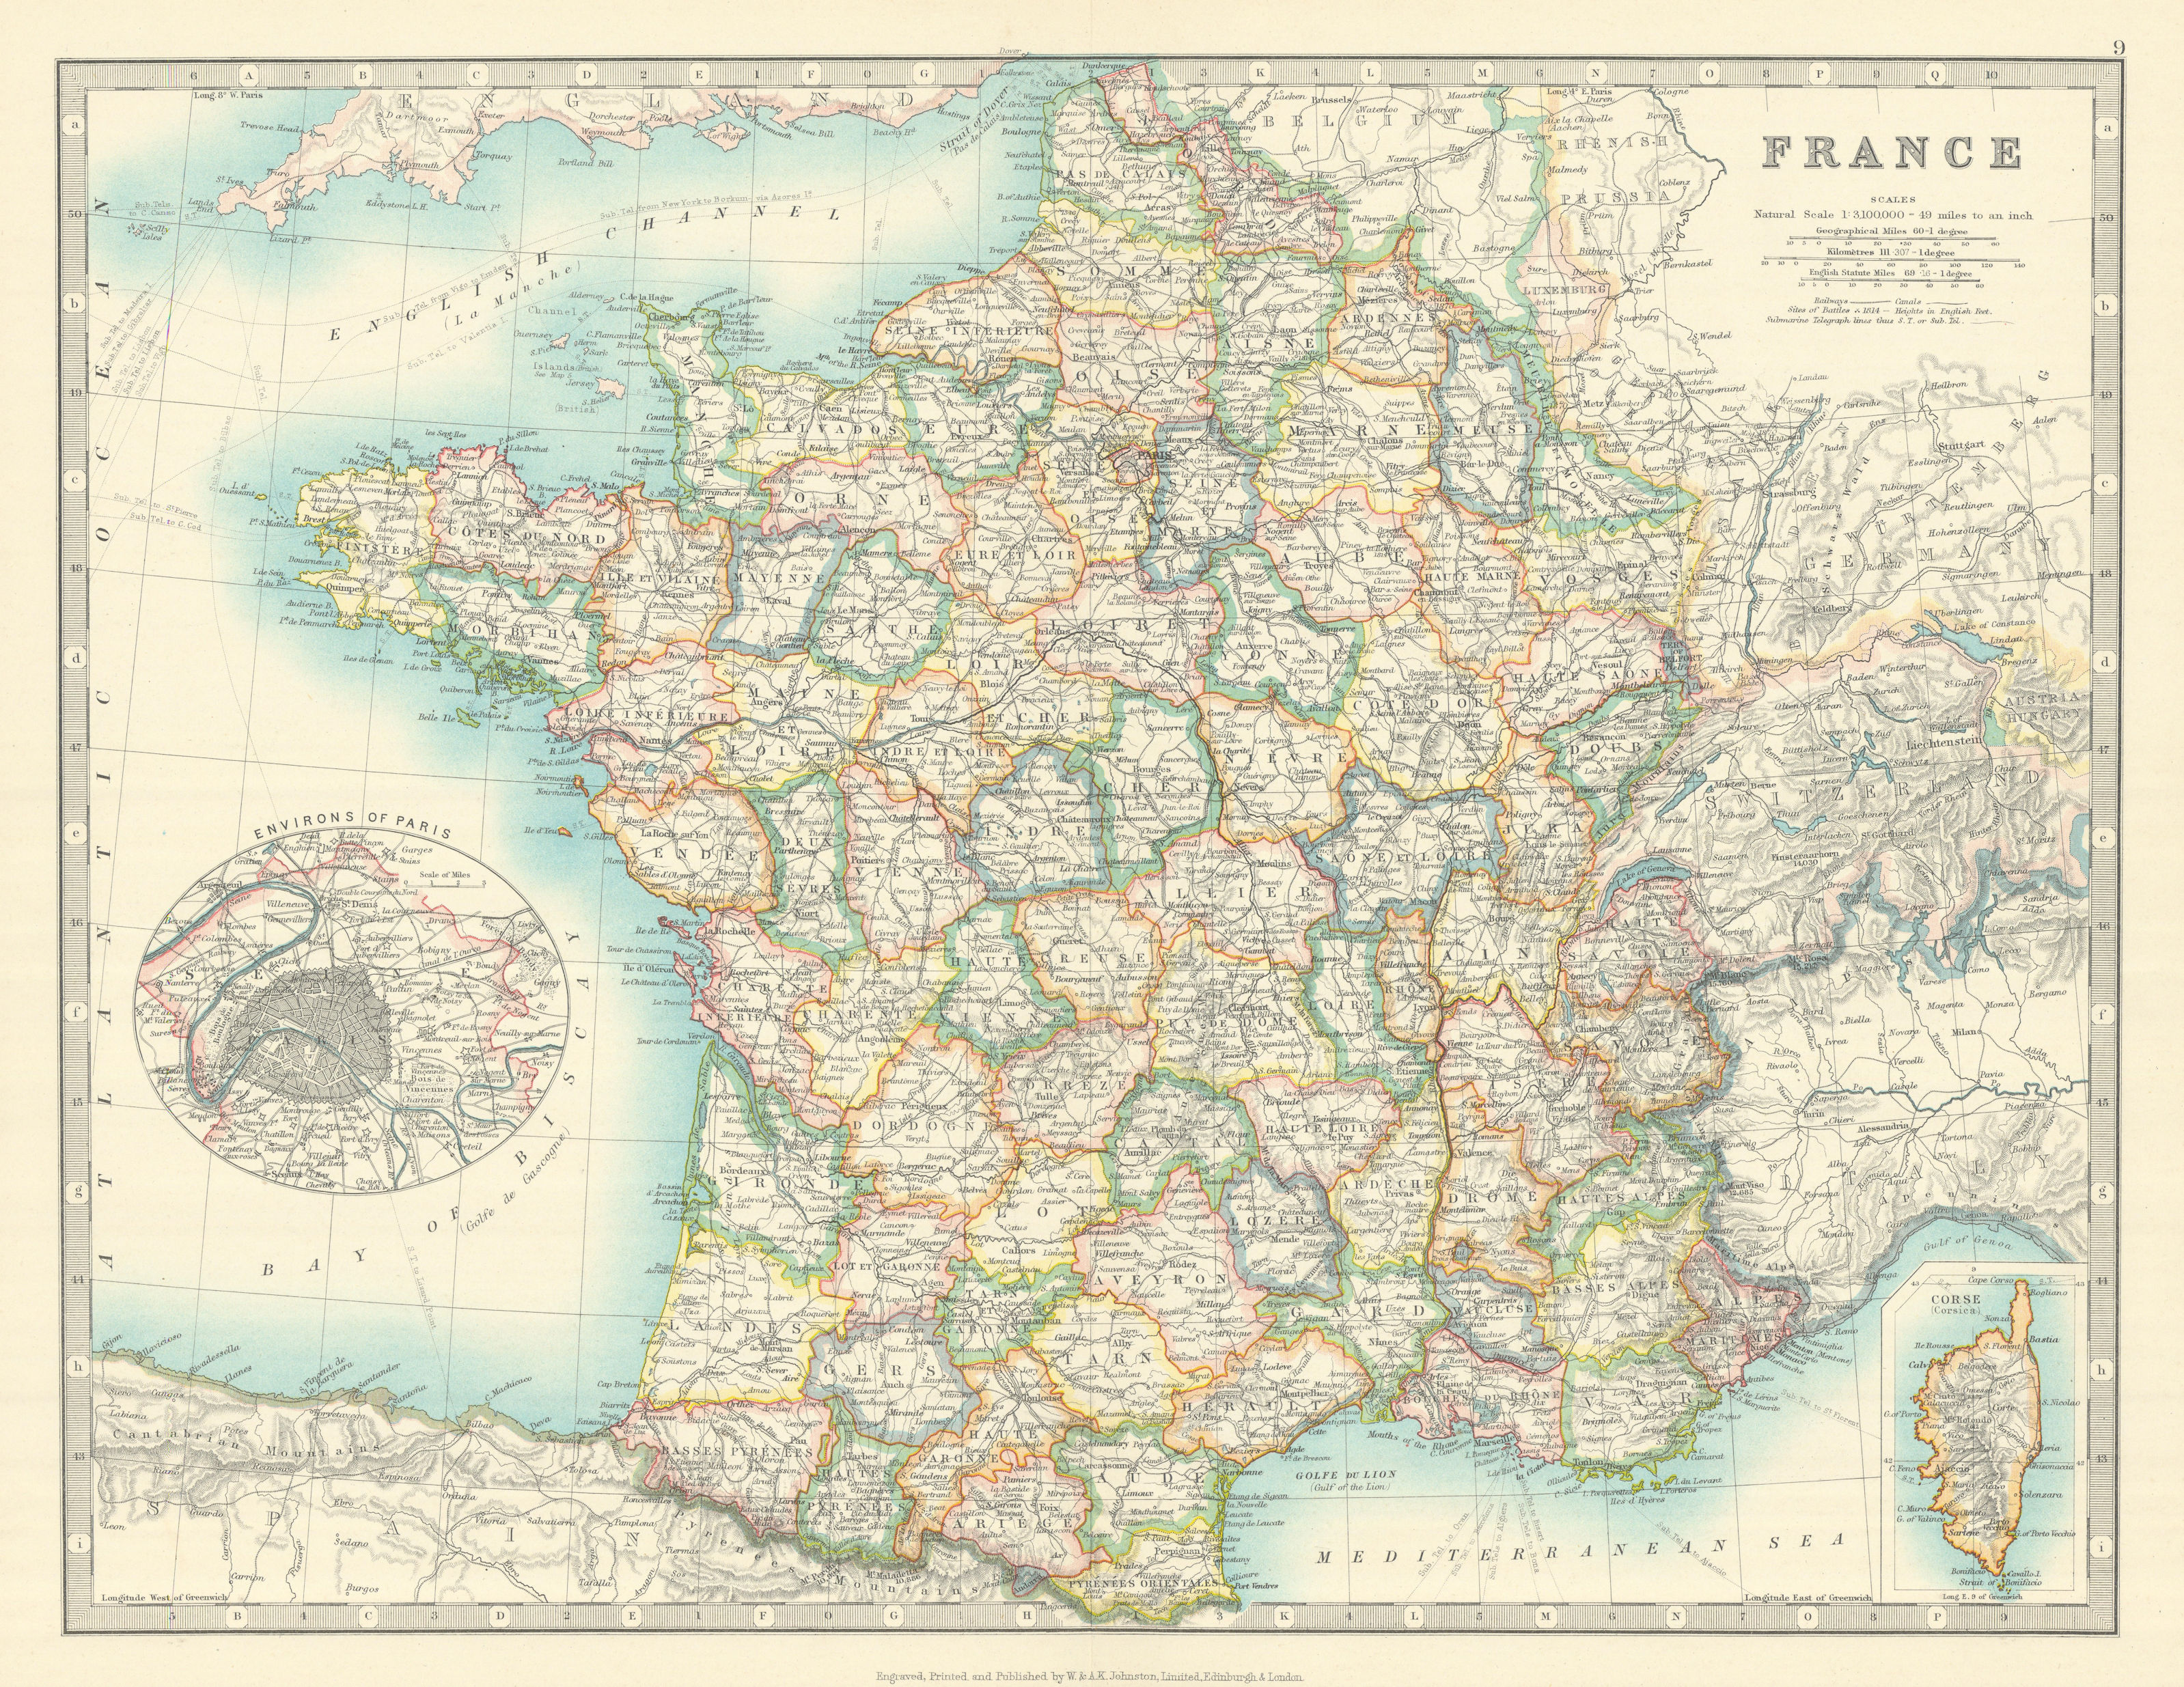 Associate Product FRANCE showing important battlefields and dates. JOHNSTON 1913 old antique map